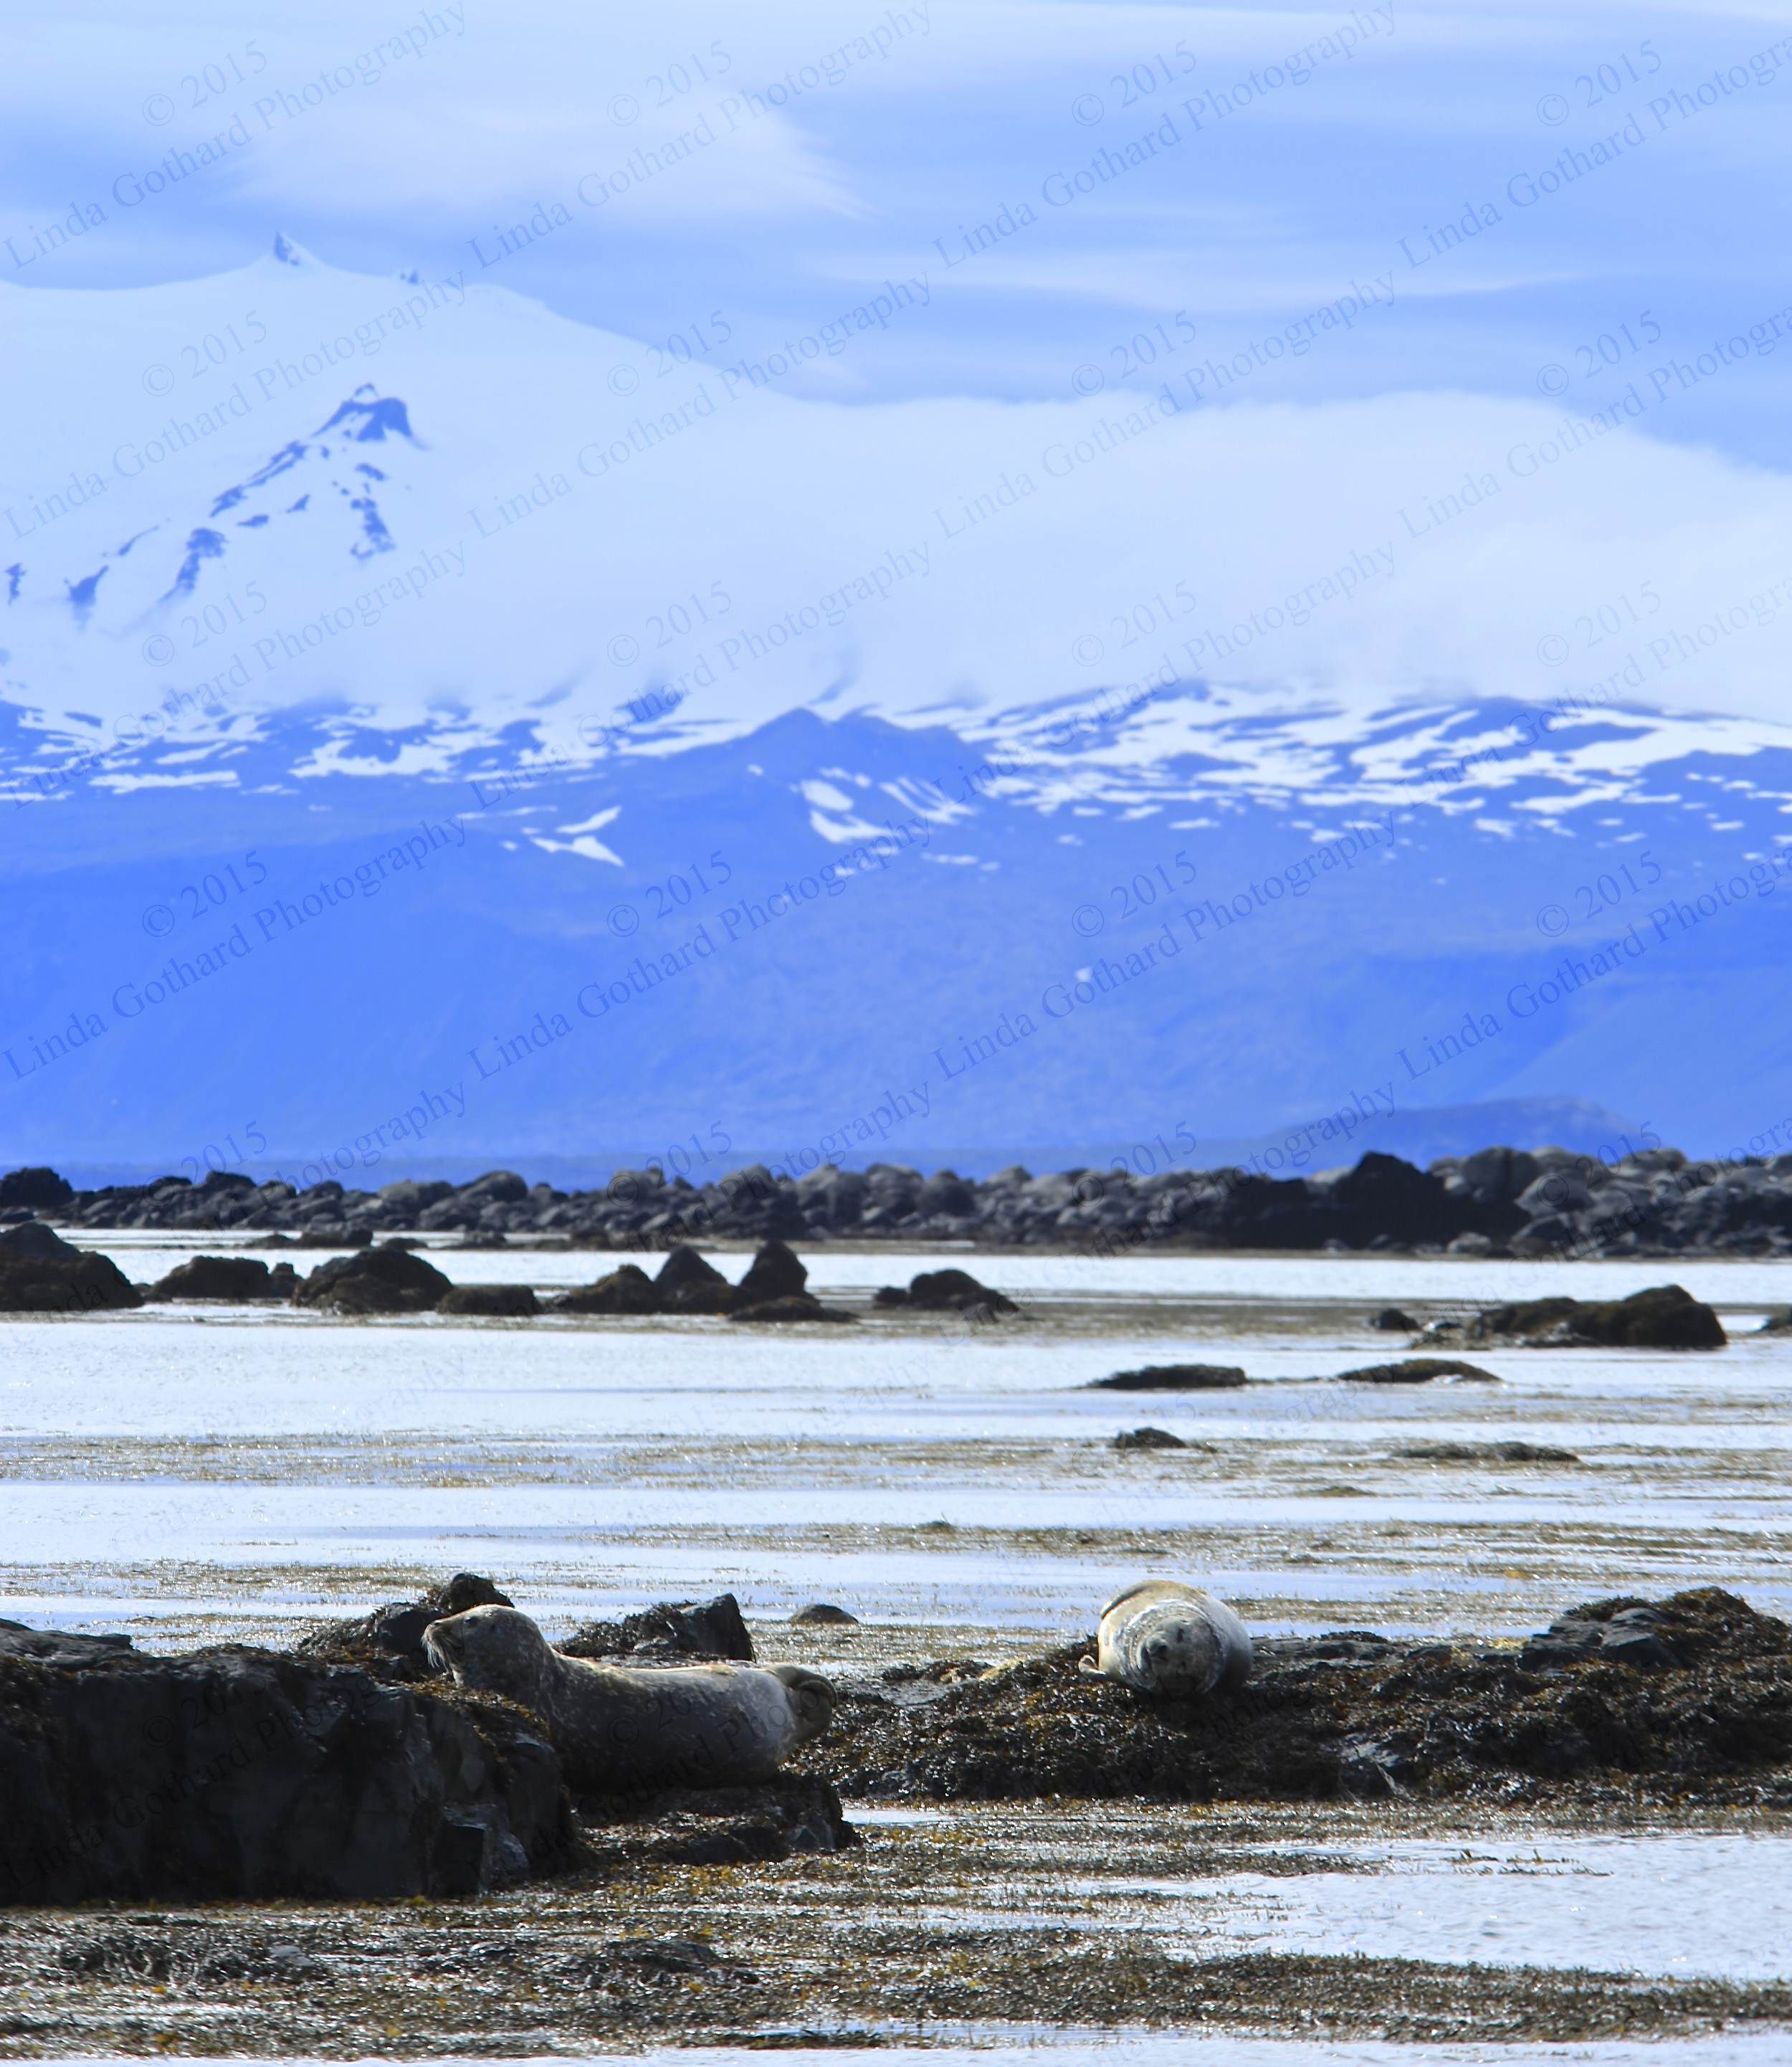 Seals at Snaefellness, Iceland